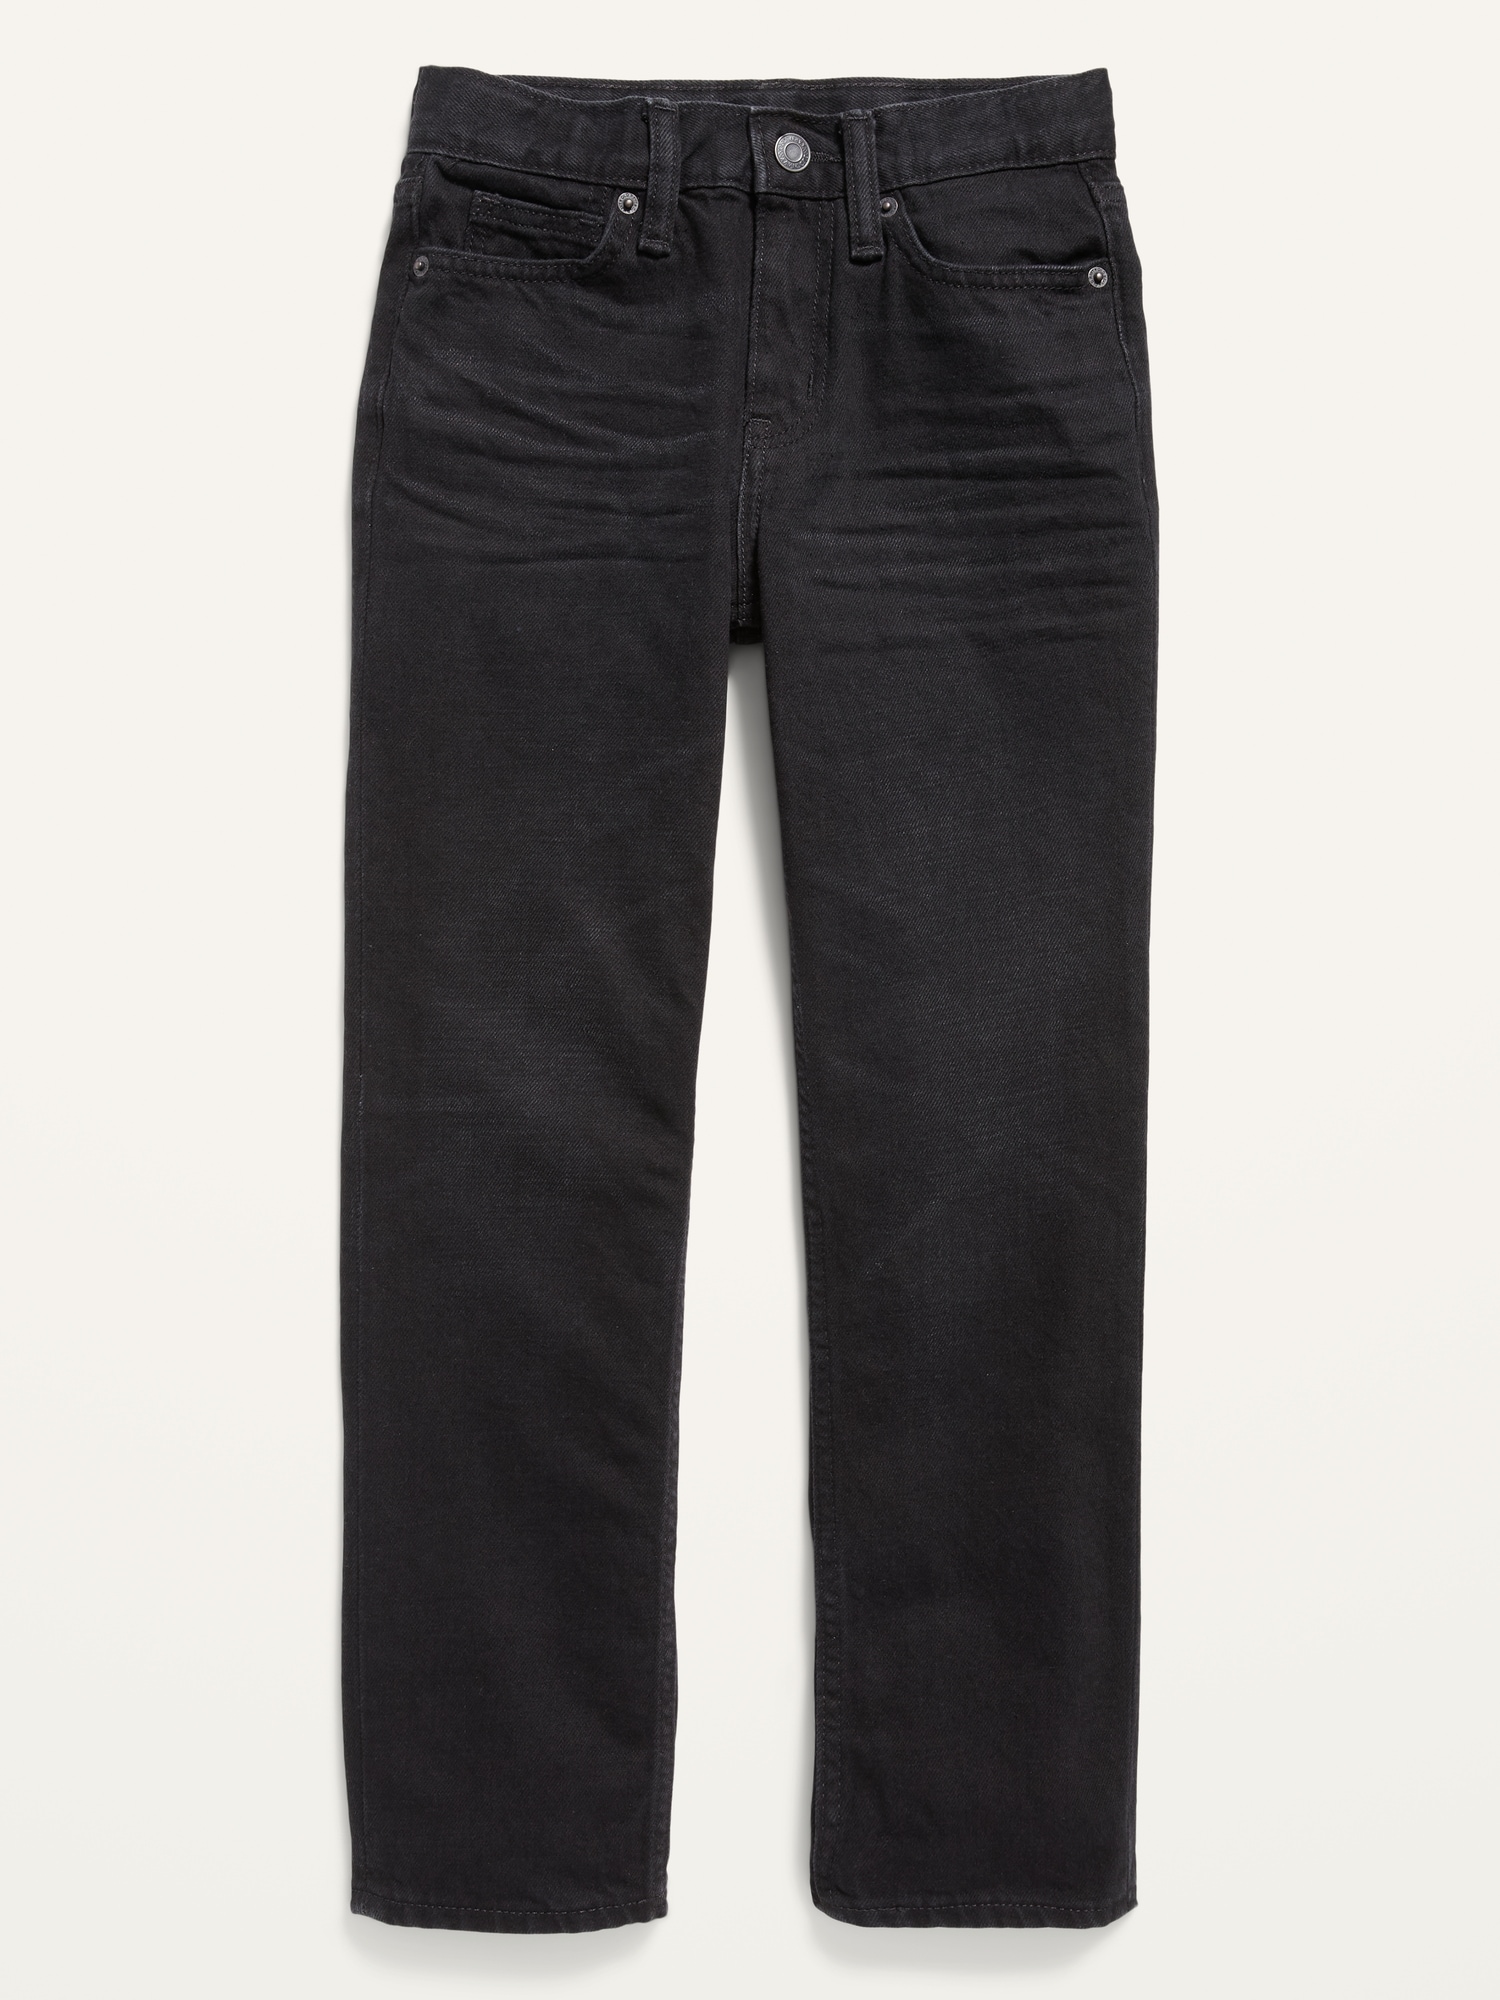 Low rise jeans with adjustable interior waistband and front snap button  closure. Five pockets. Ripped details. - Black